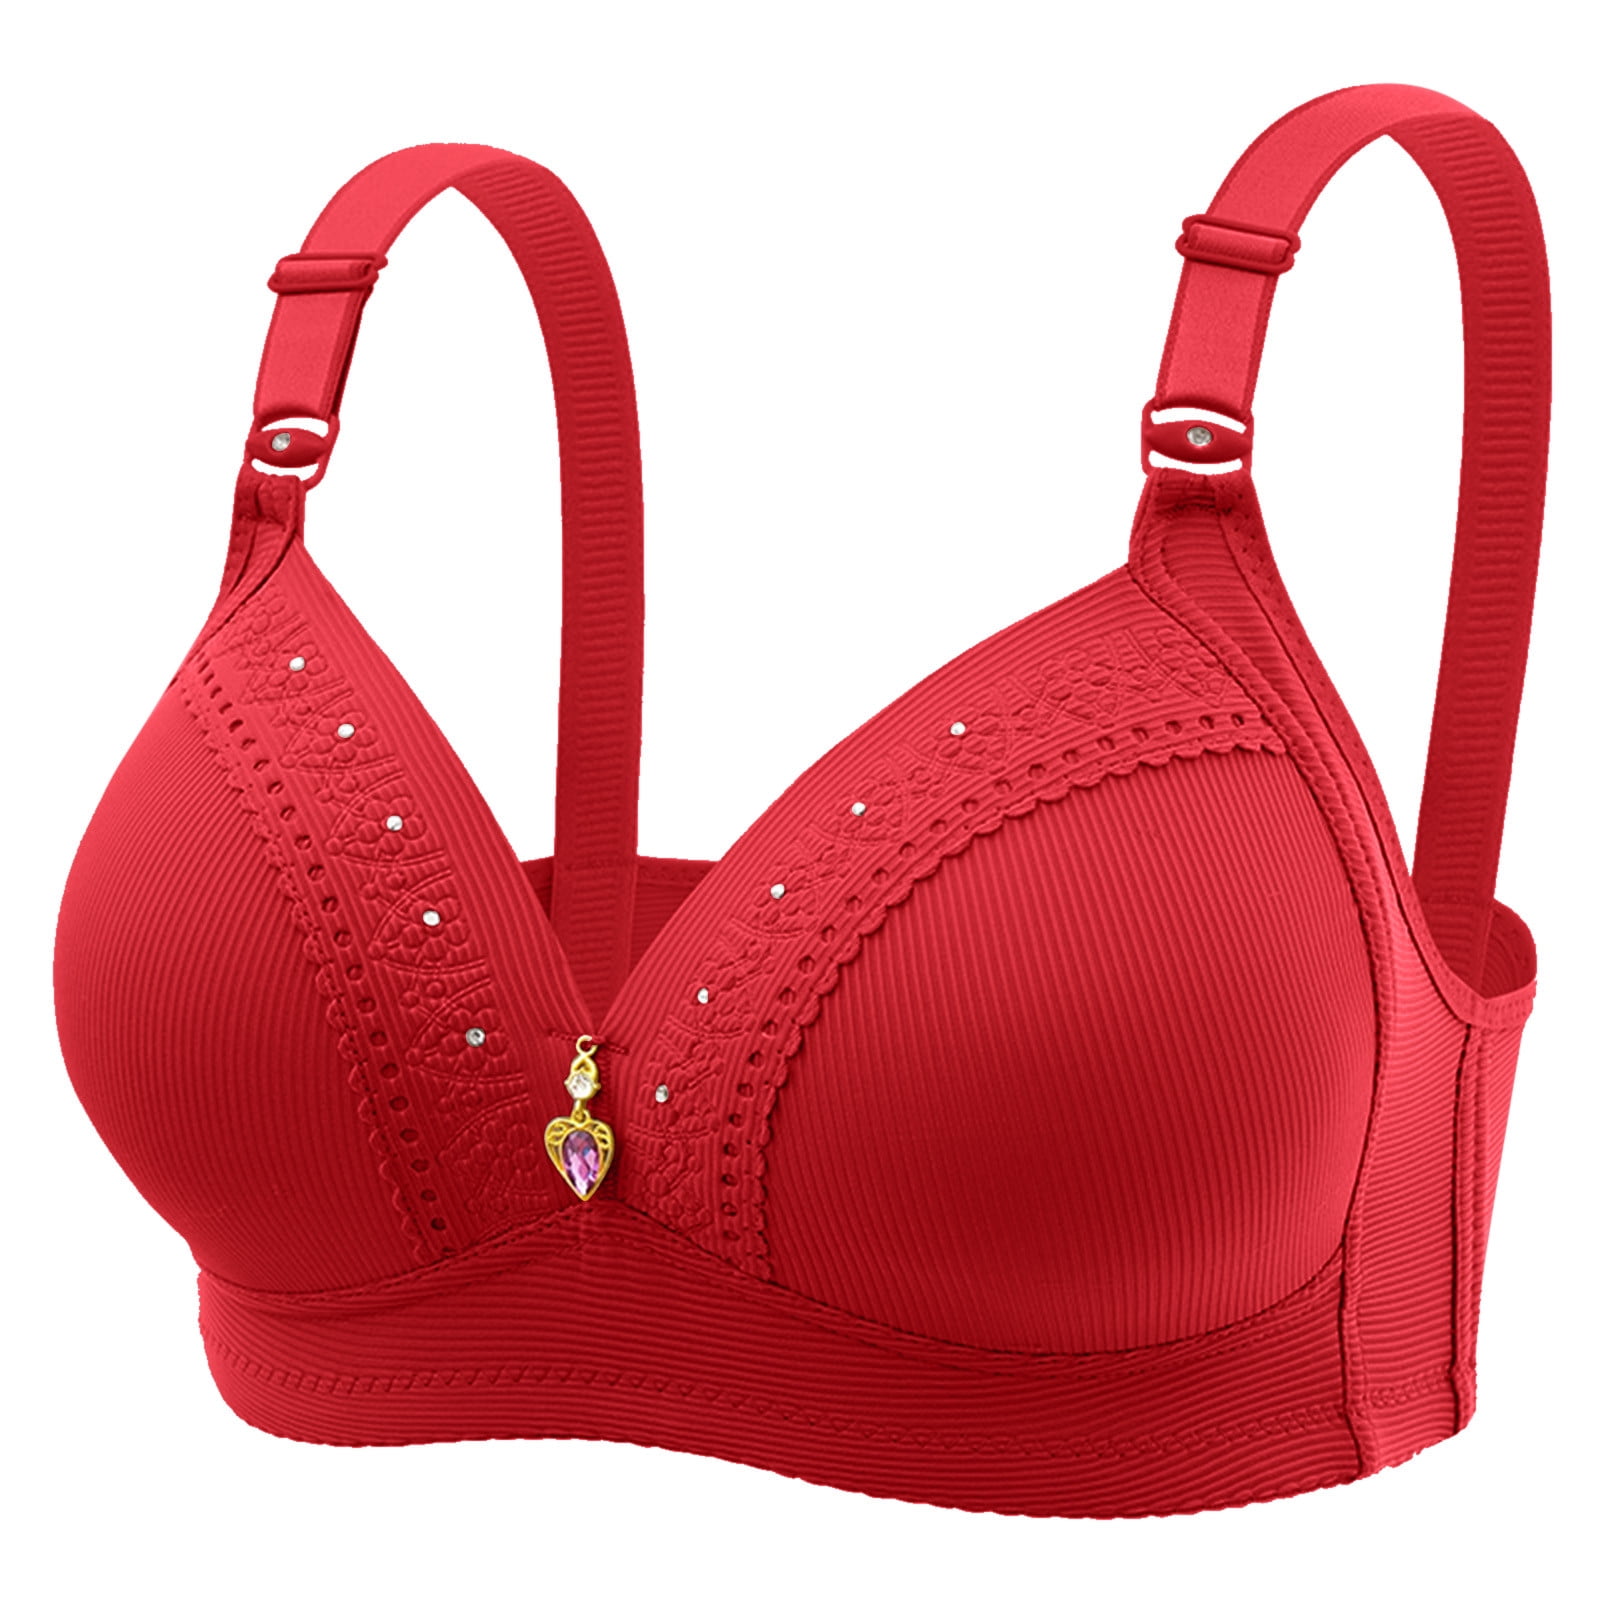 adviicd Cotton Bras for Women Padded Push Up Bras for Women Seamless  Underwire T-Shirt Bra Red X-Large 